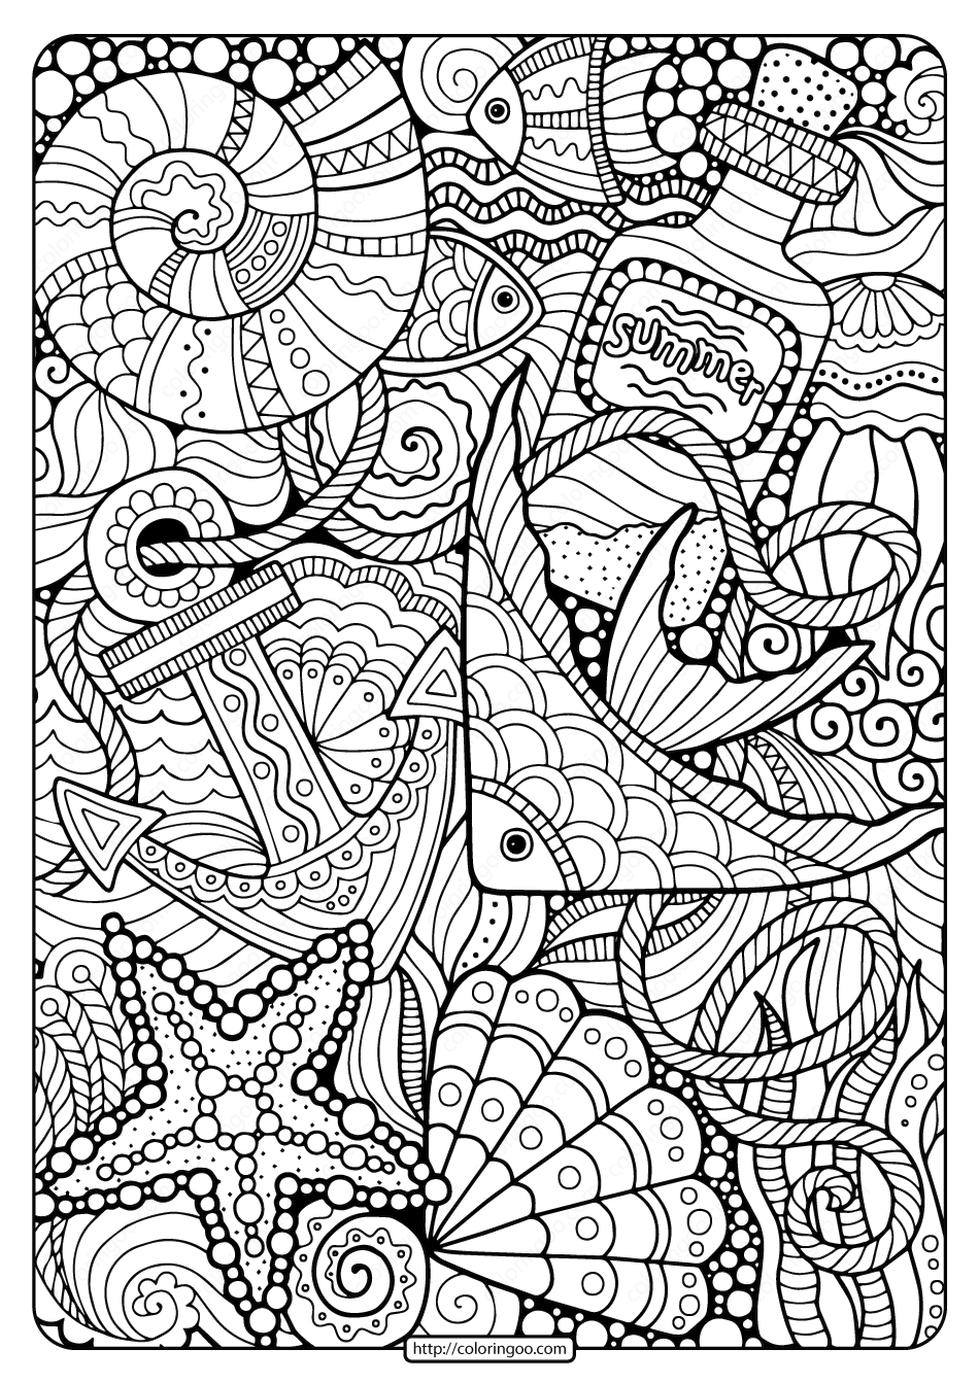 get-this-ocean-coloring-pages-for-adults-free-printable-sea-themed-doodle